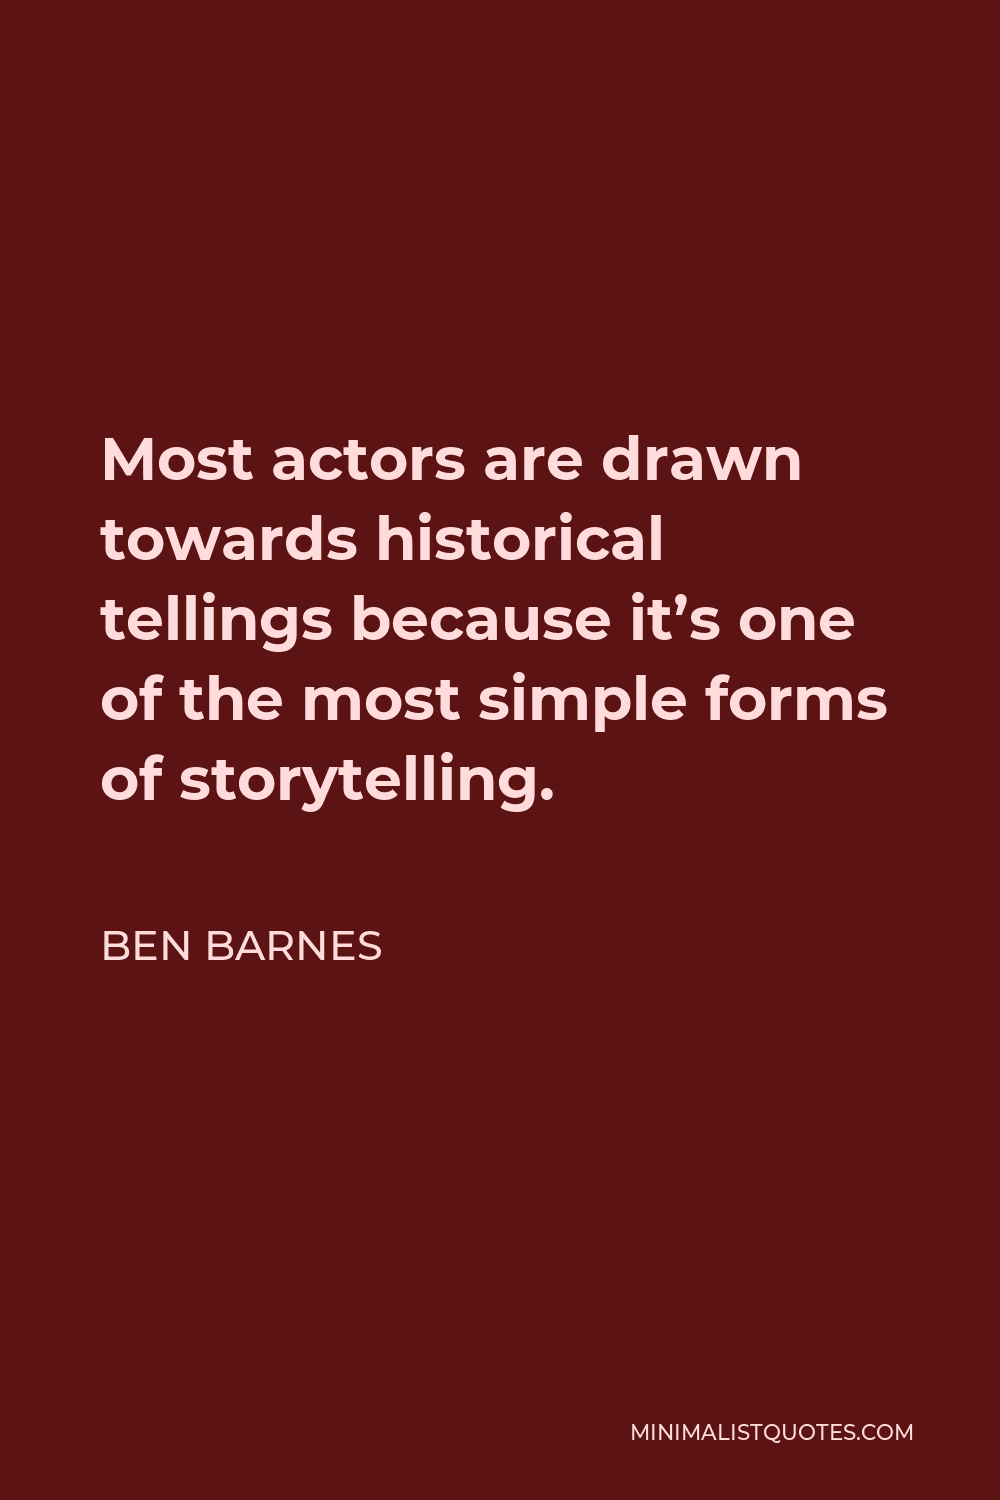 Ben Barnes Quote - Most actors are drawn towards historical tellings because it’s one of the most simple forms of storytelling.